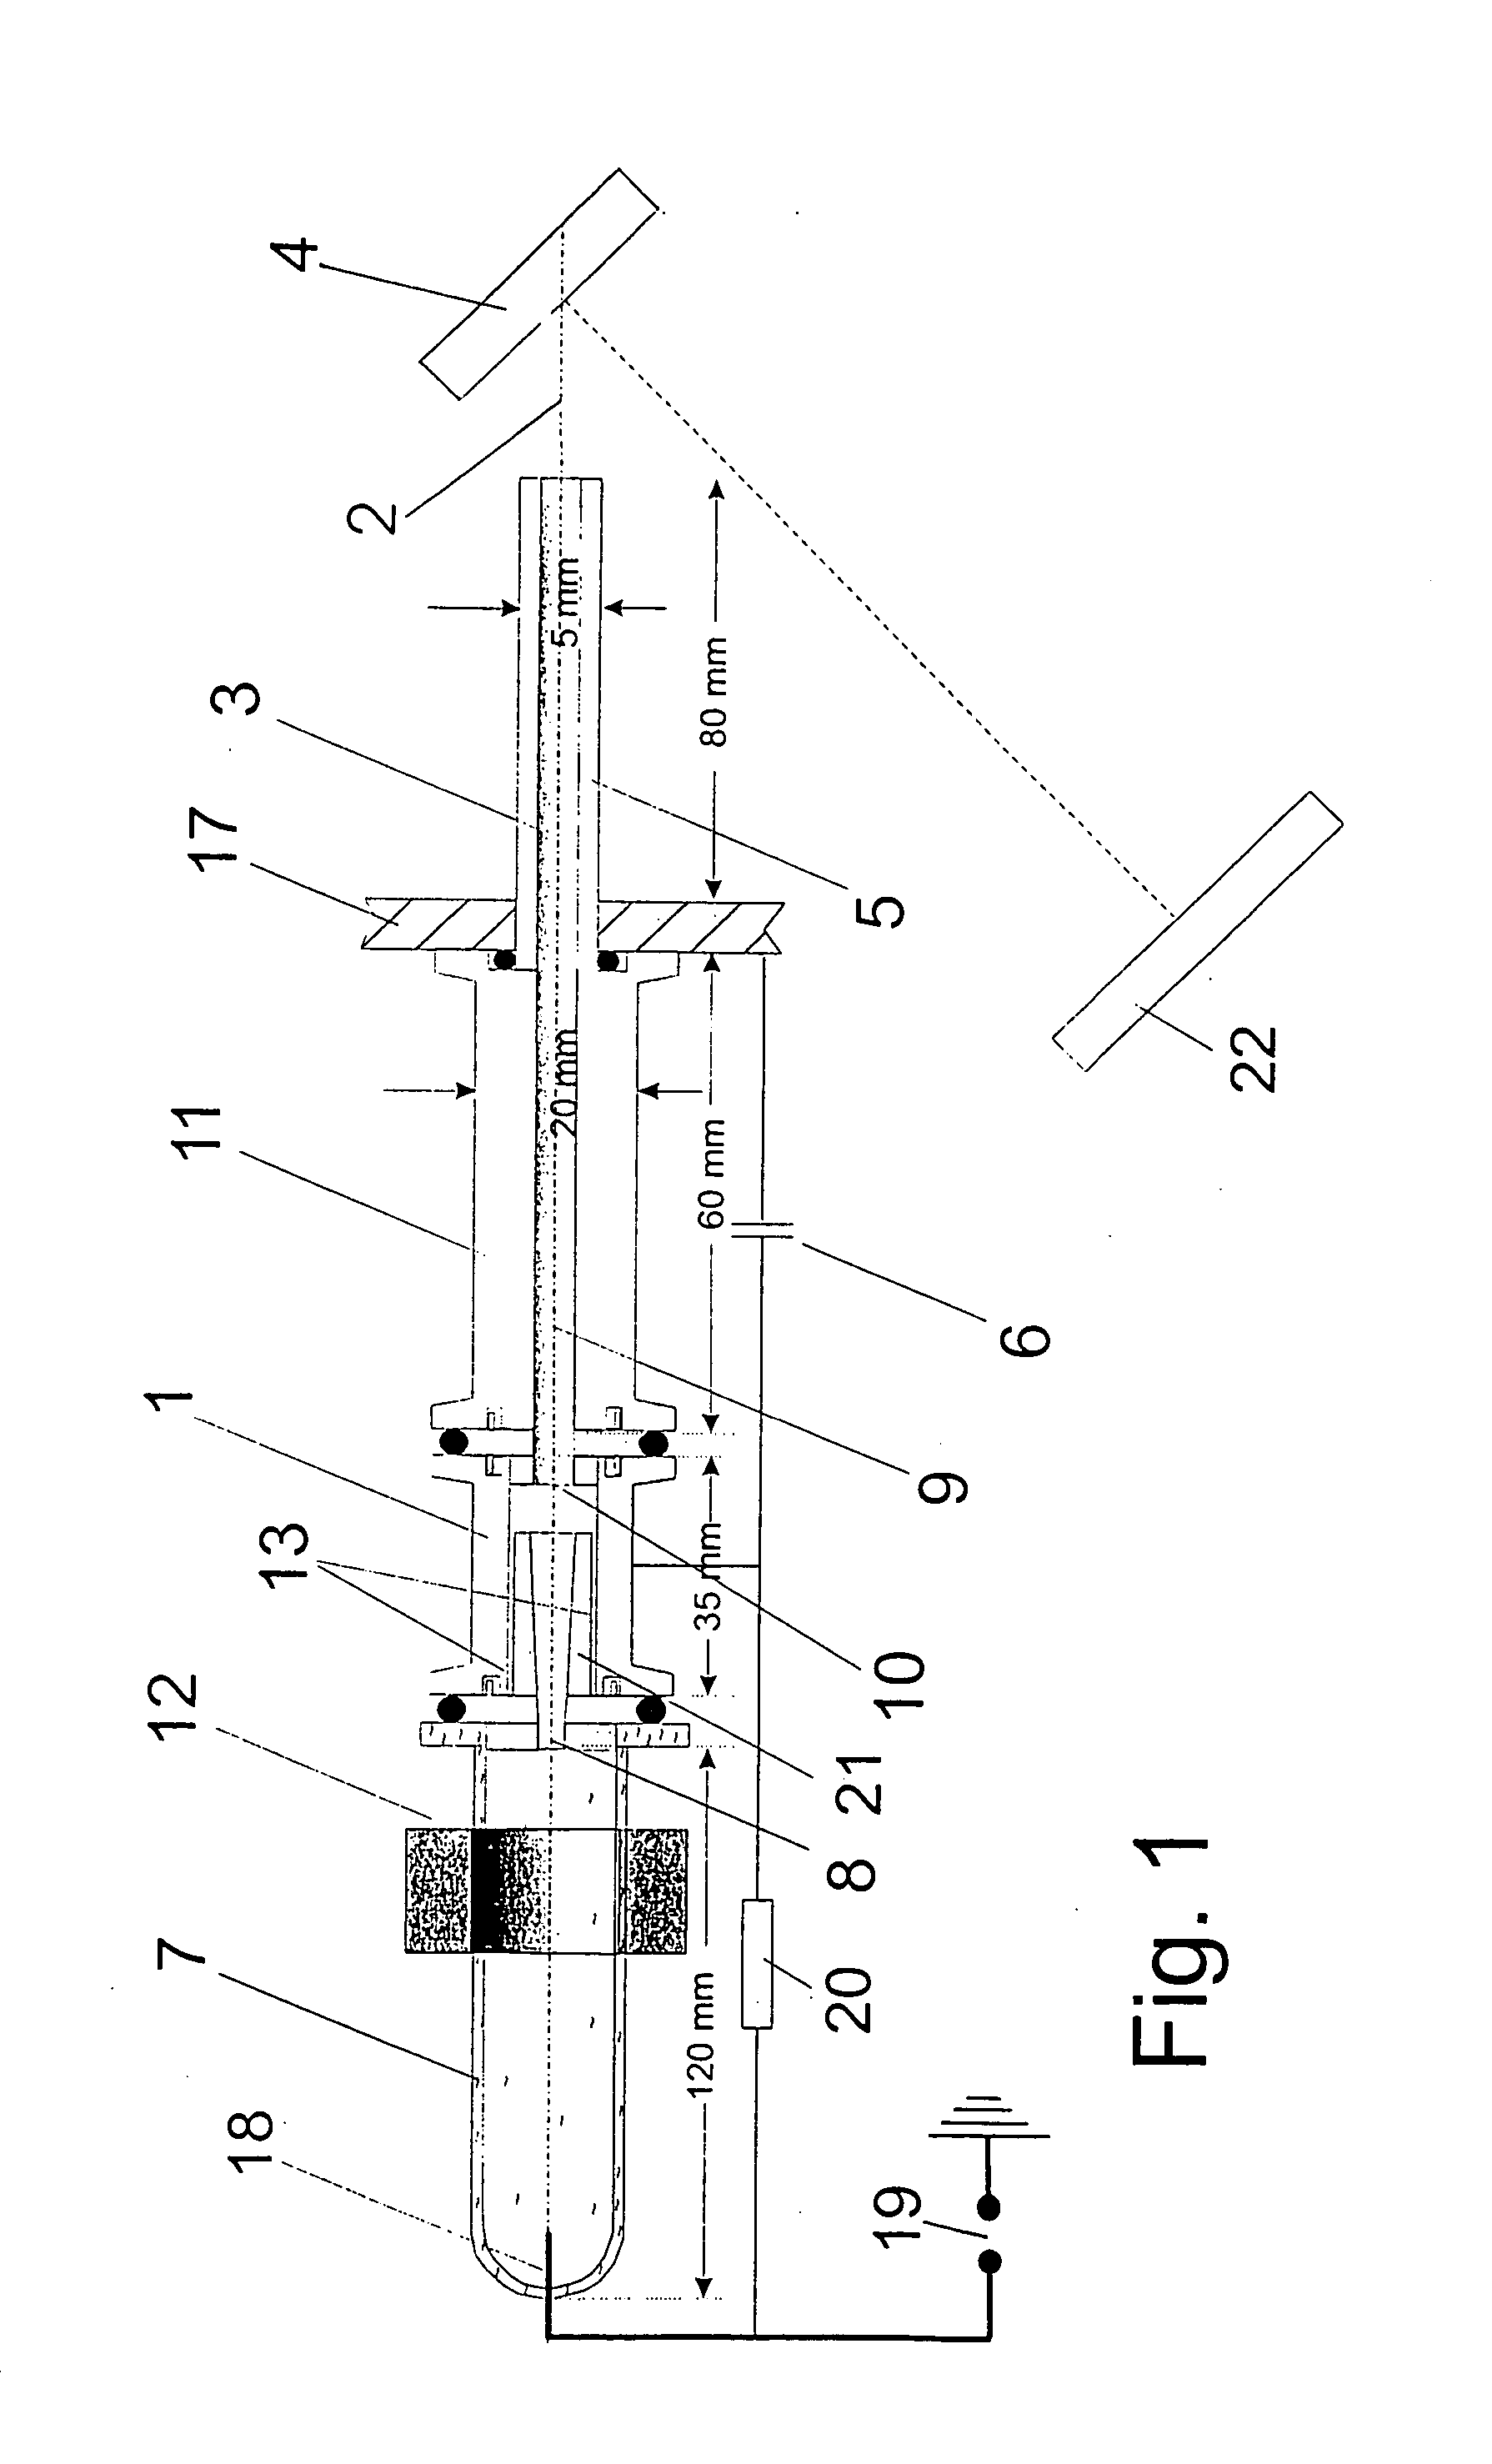 Channel spark source for generating a stable focussed electron beam